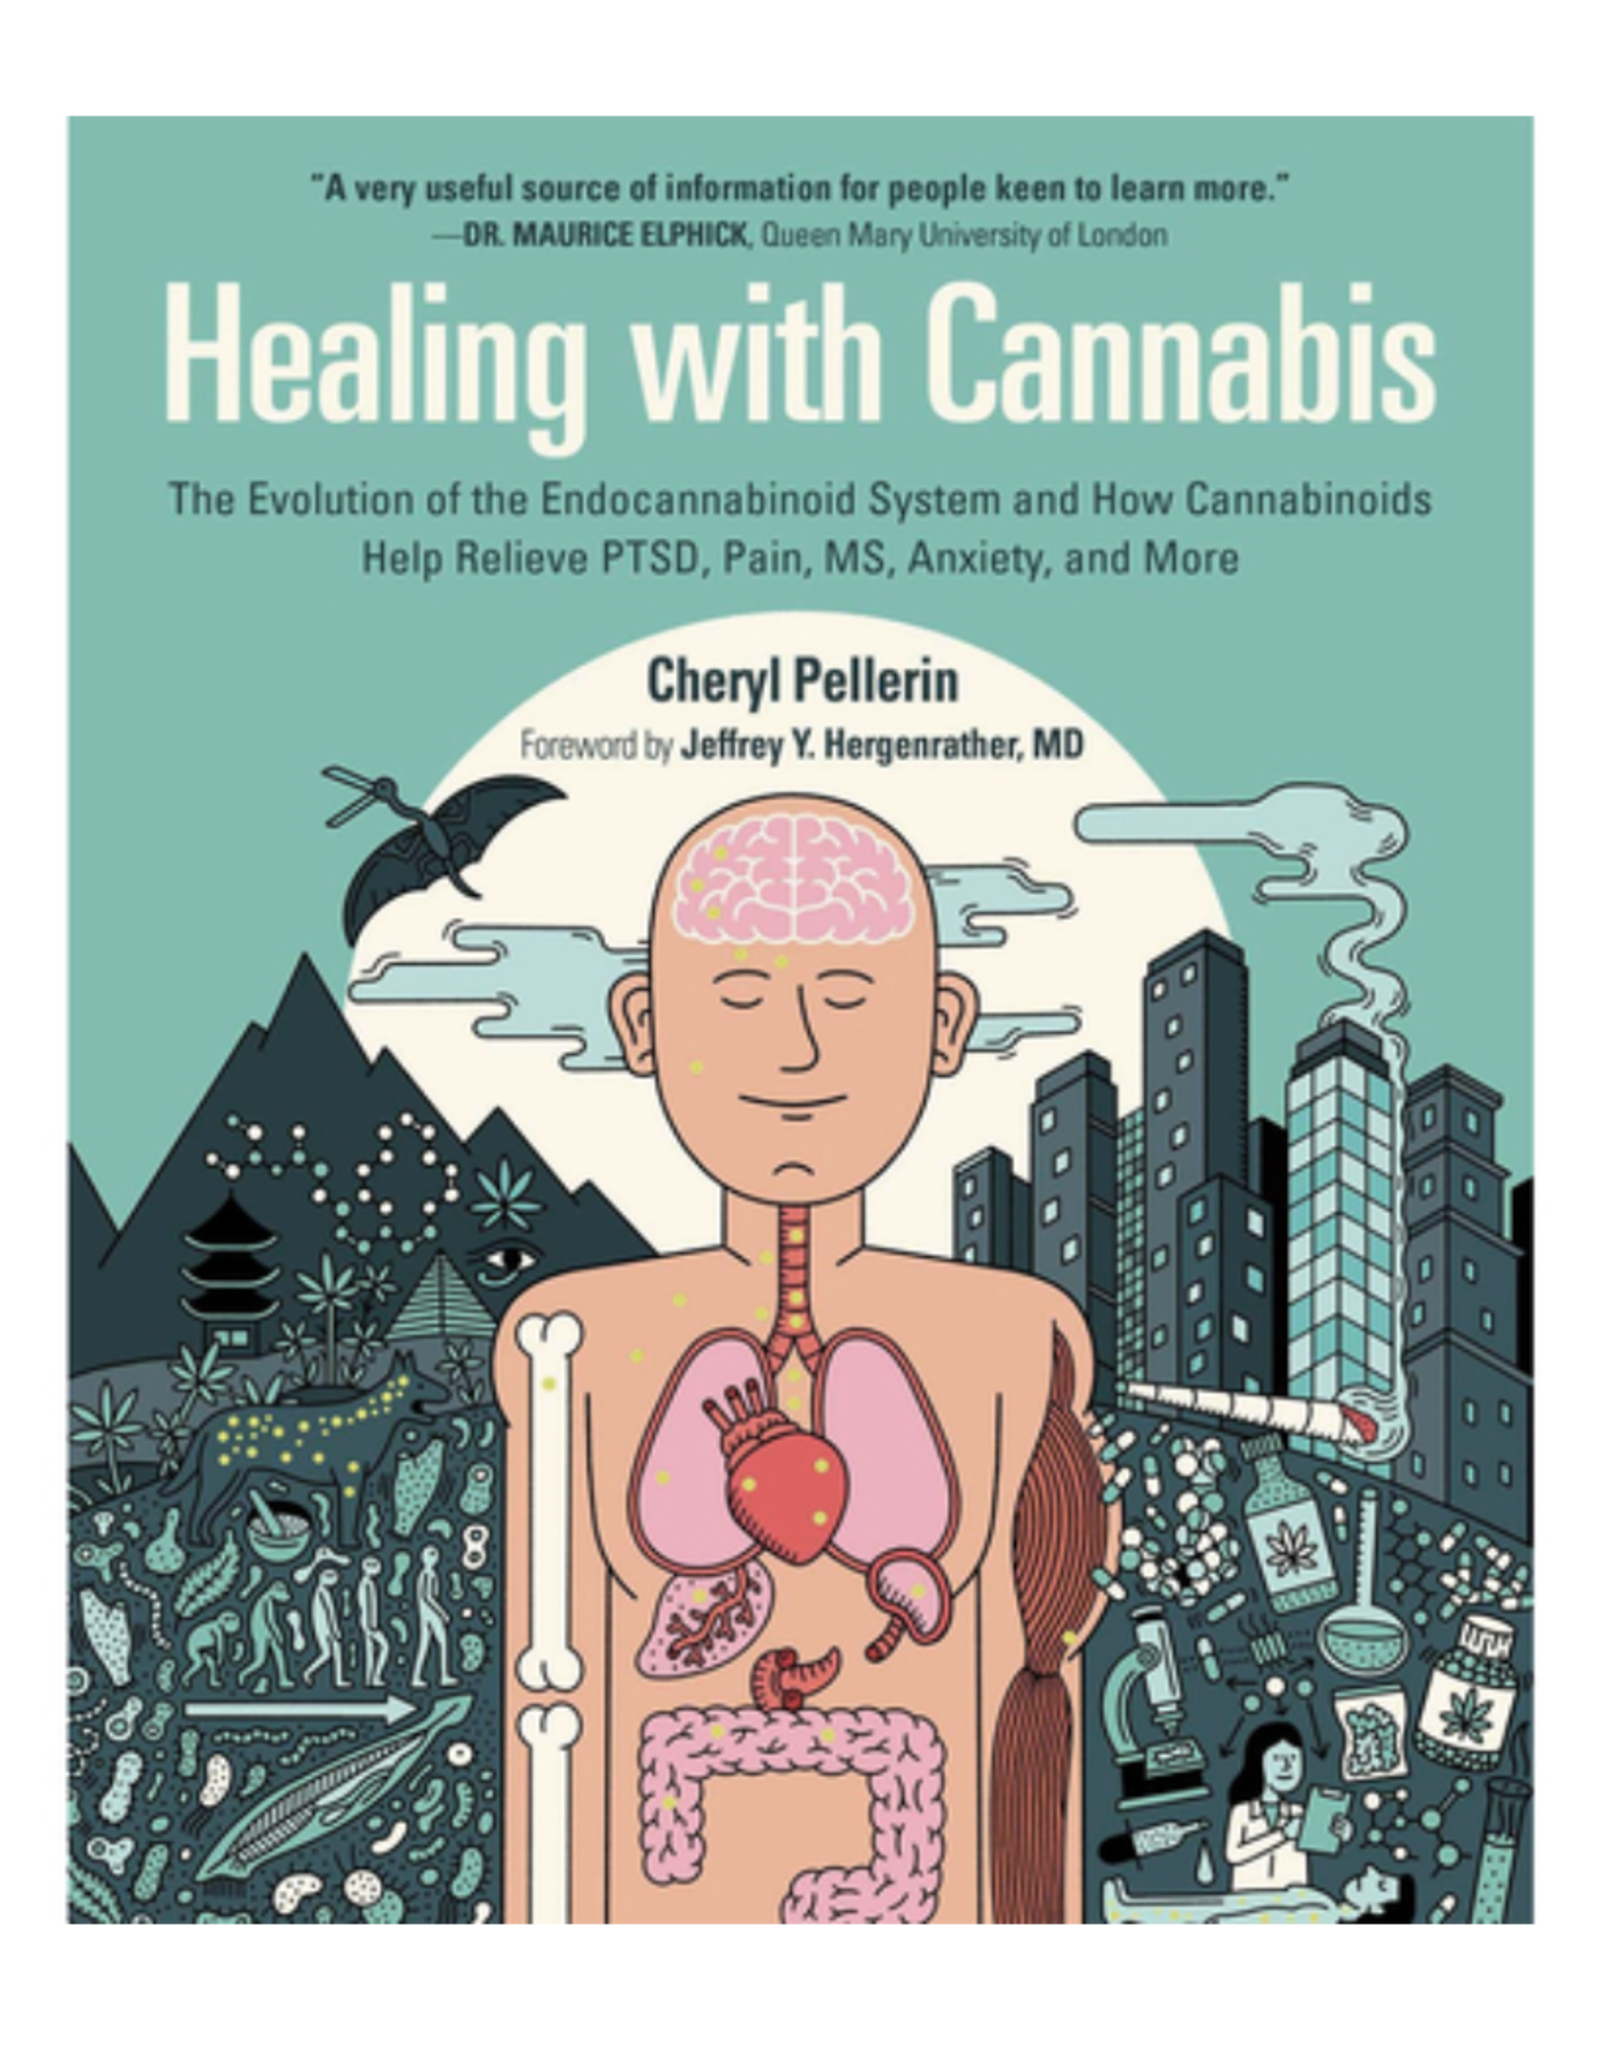 Healing with Cannabis: The Evolution of the Endocannabinoid System and How Cannabinoids Help Relieve PTSD, Pain, MS, Anxiety, and More by Cheryl Pellerin